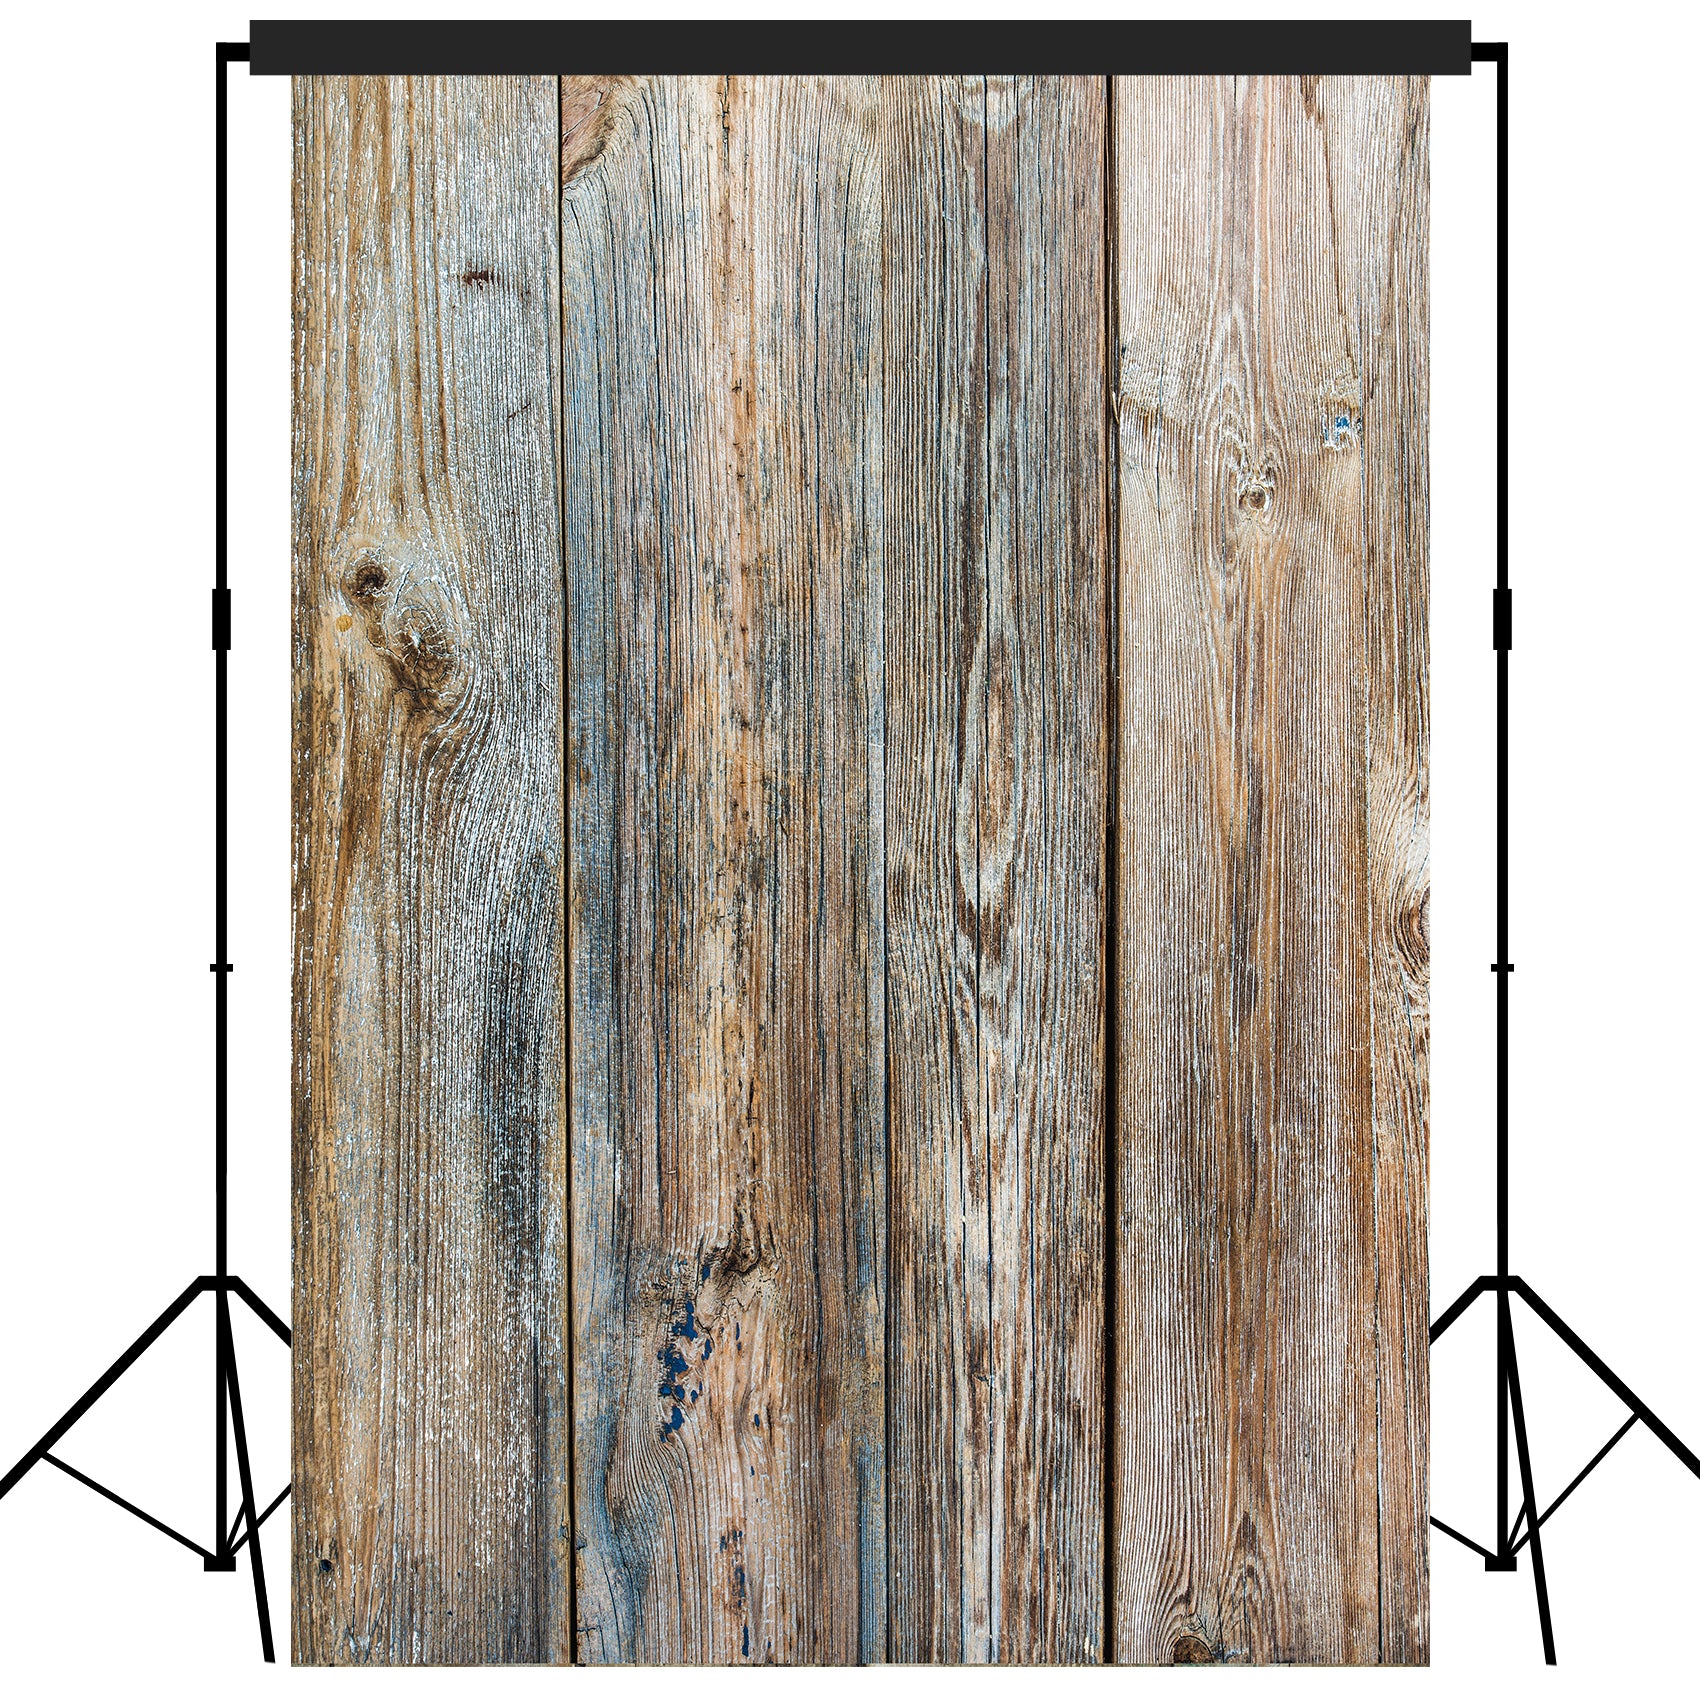 Rustic Distressed Wood Backdrop Photography Background #1777 Pale Brown